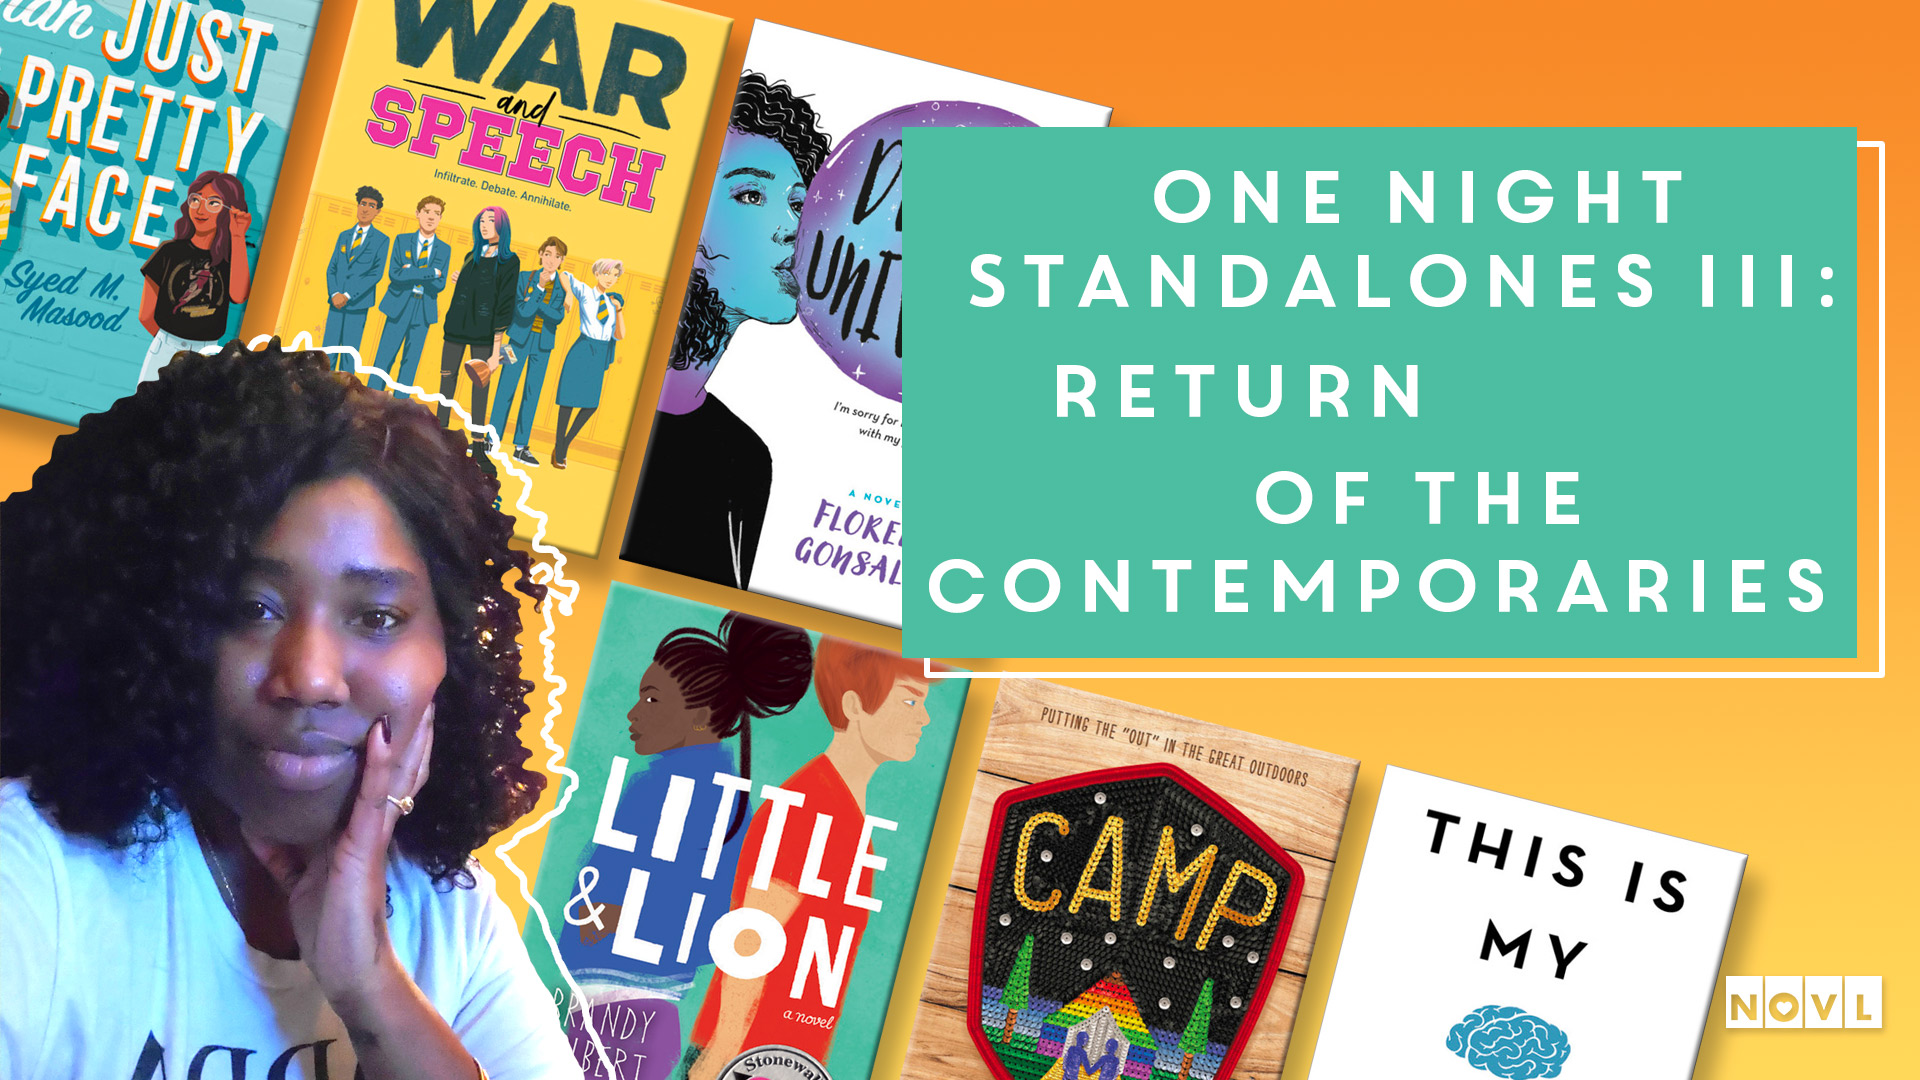 The NOVL Blog, Featured Image for Article: One Night Standalones III: Return of the Contemporaries